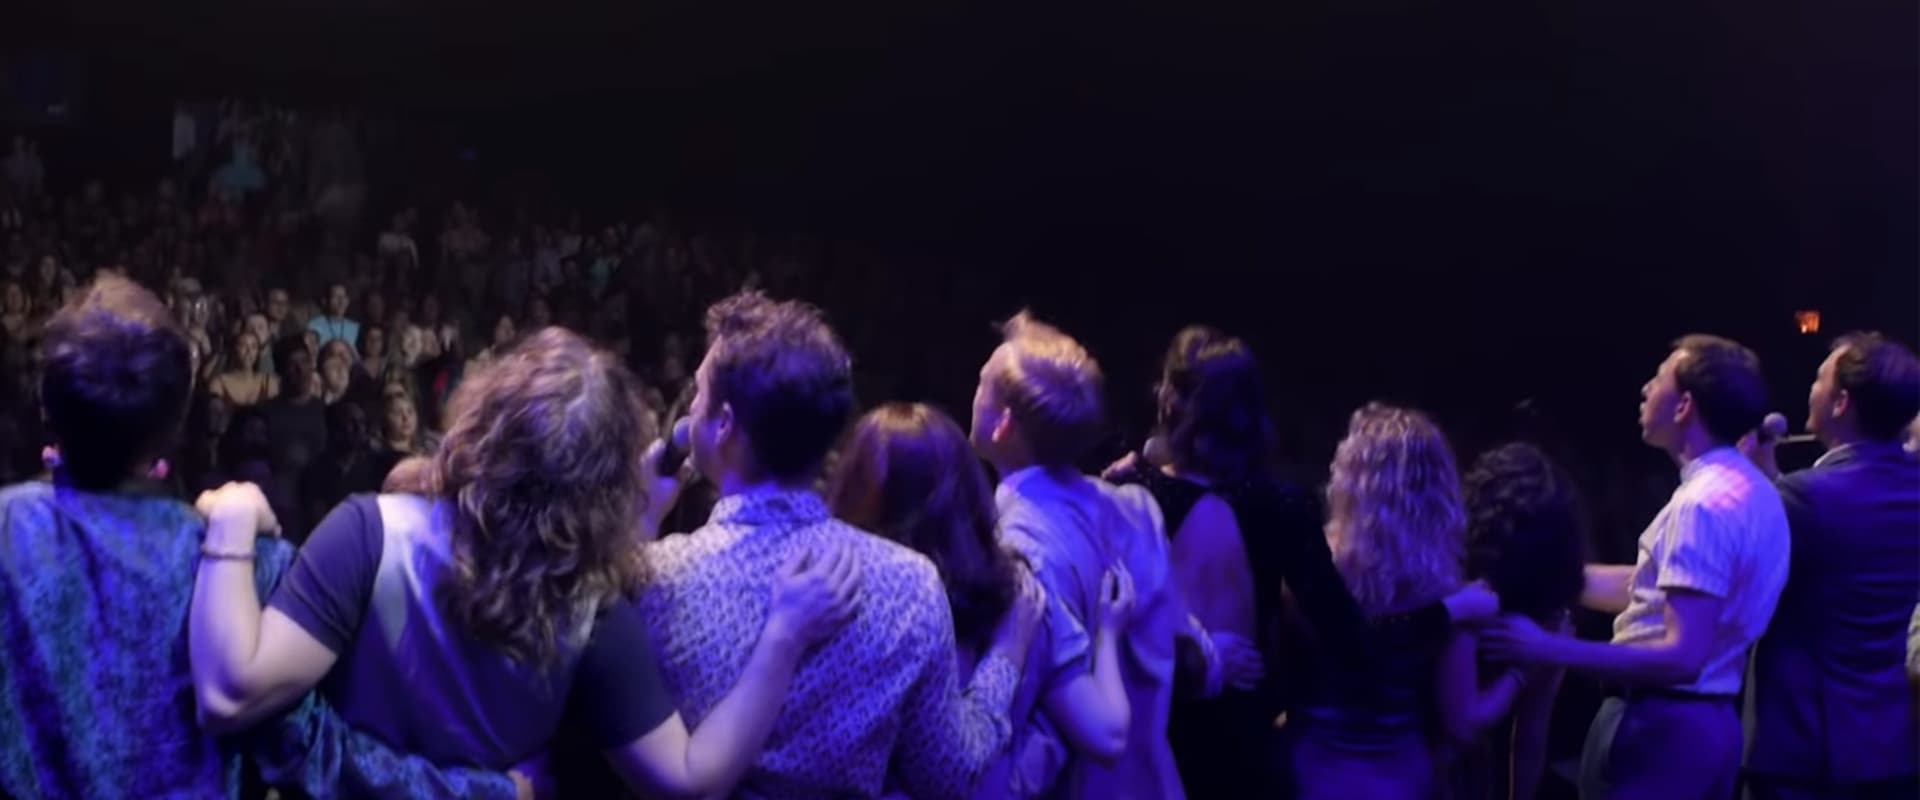 10umentary: Behind the Scenes of StarKid Homecoming